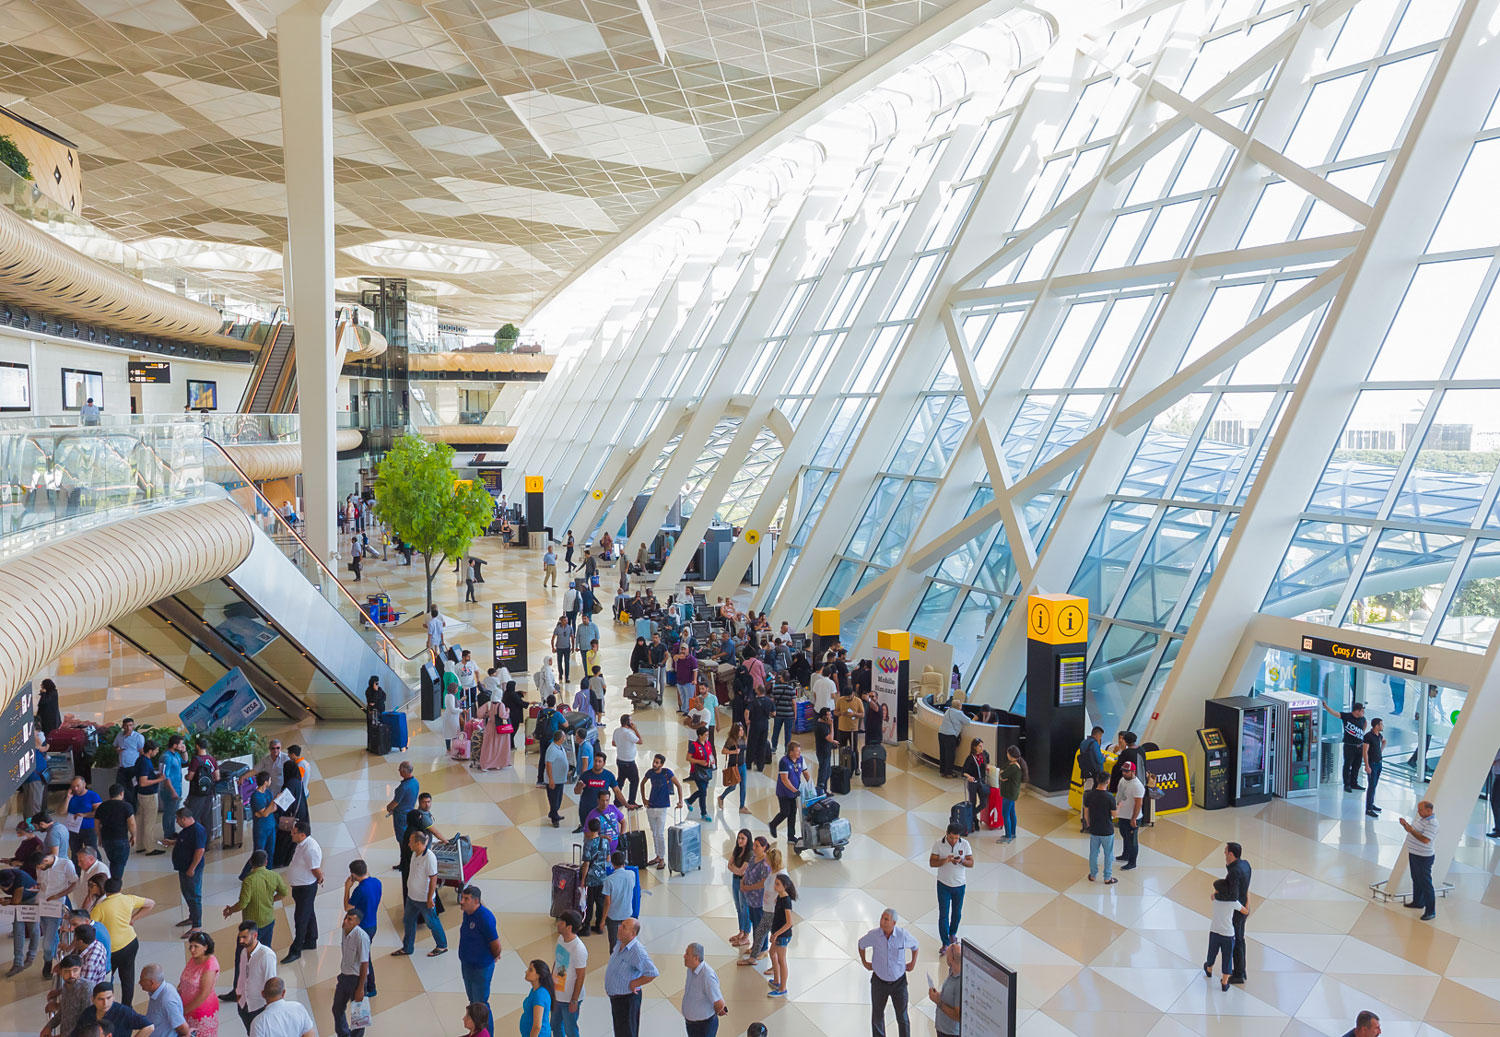 Azerbaijan’s airports served almost 1.5 million passengers in first four months 2019